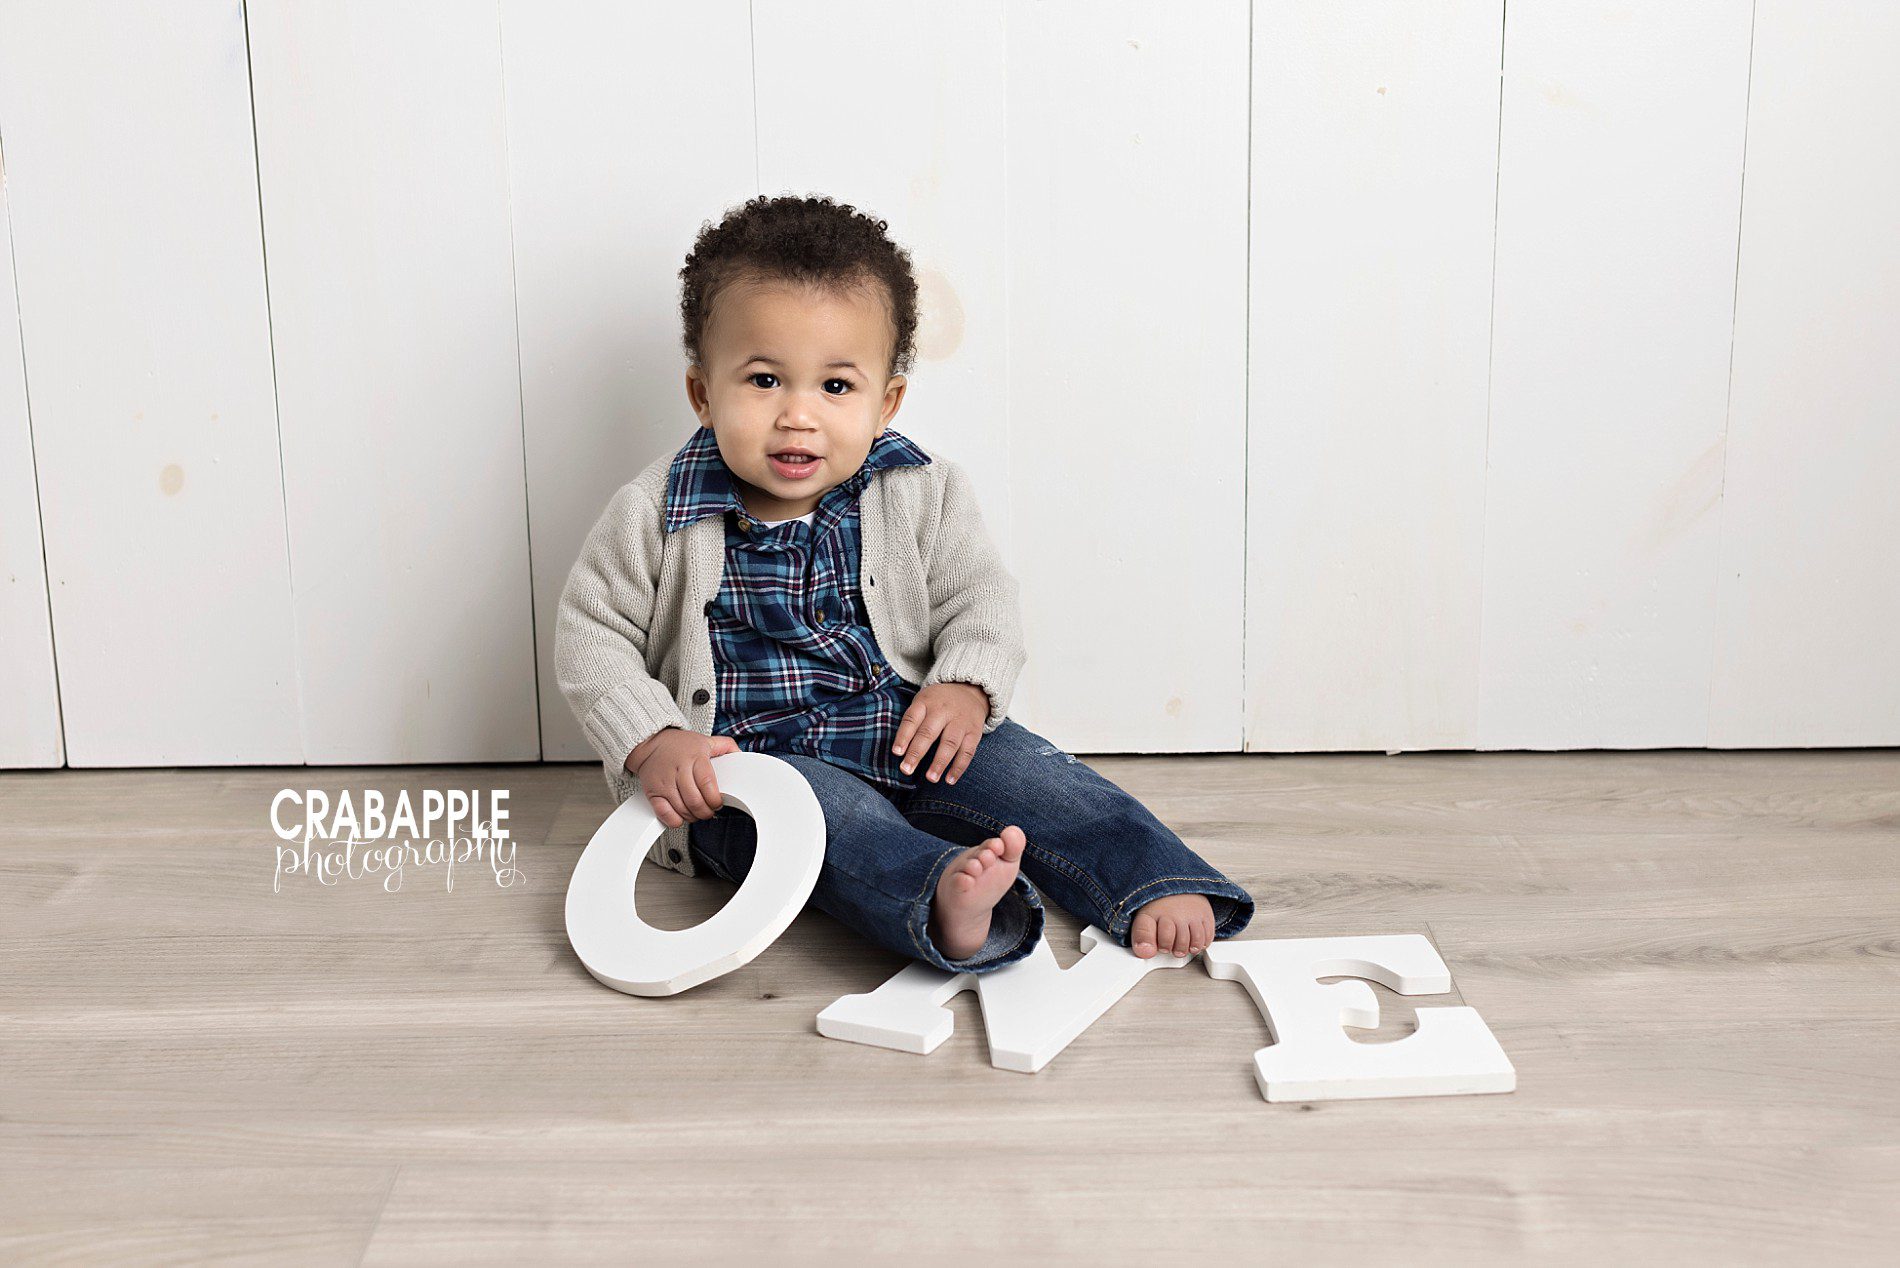 One year photo ideas for baby boy